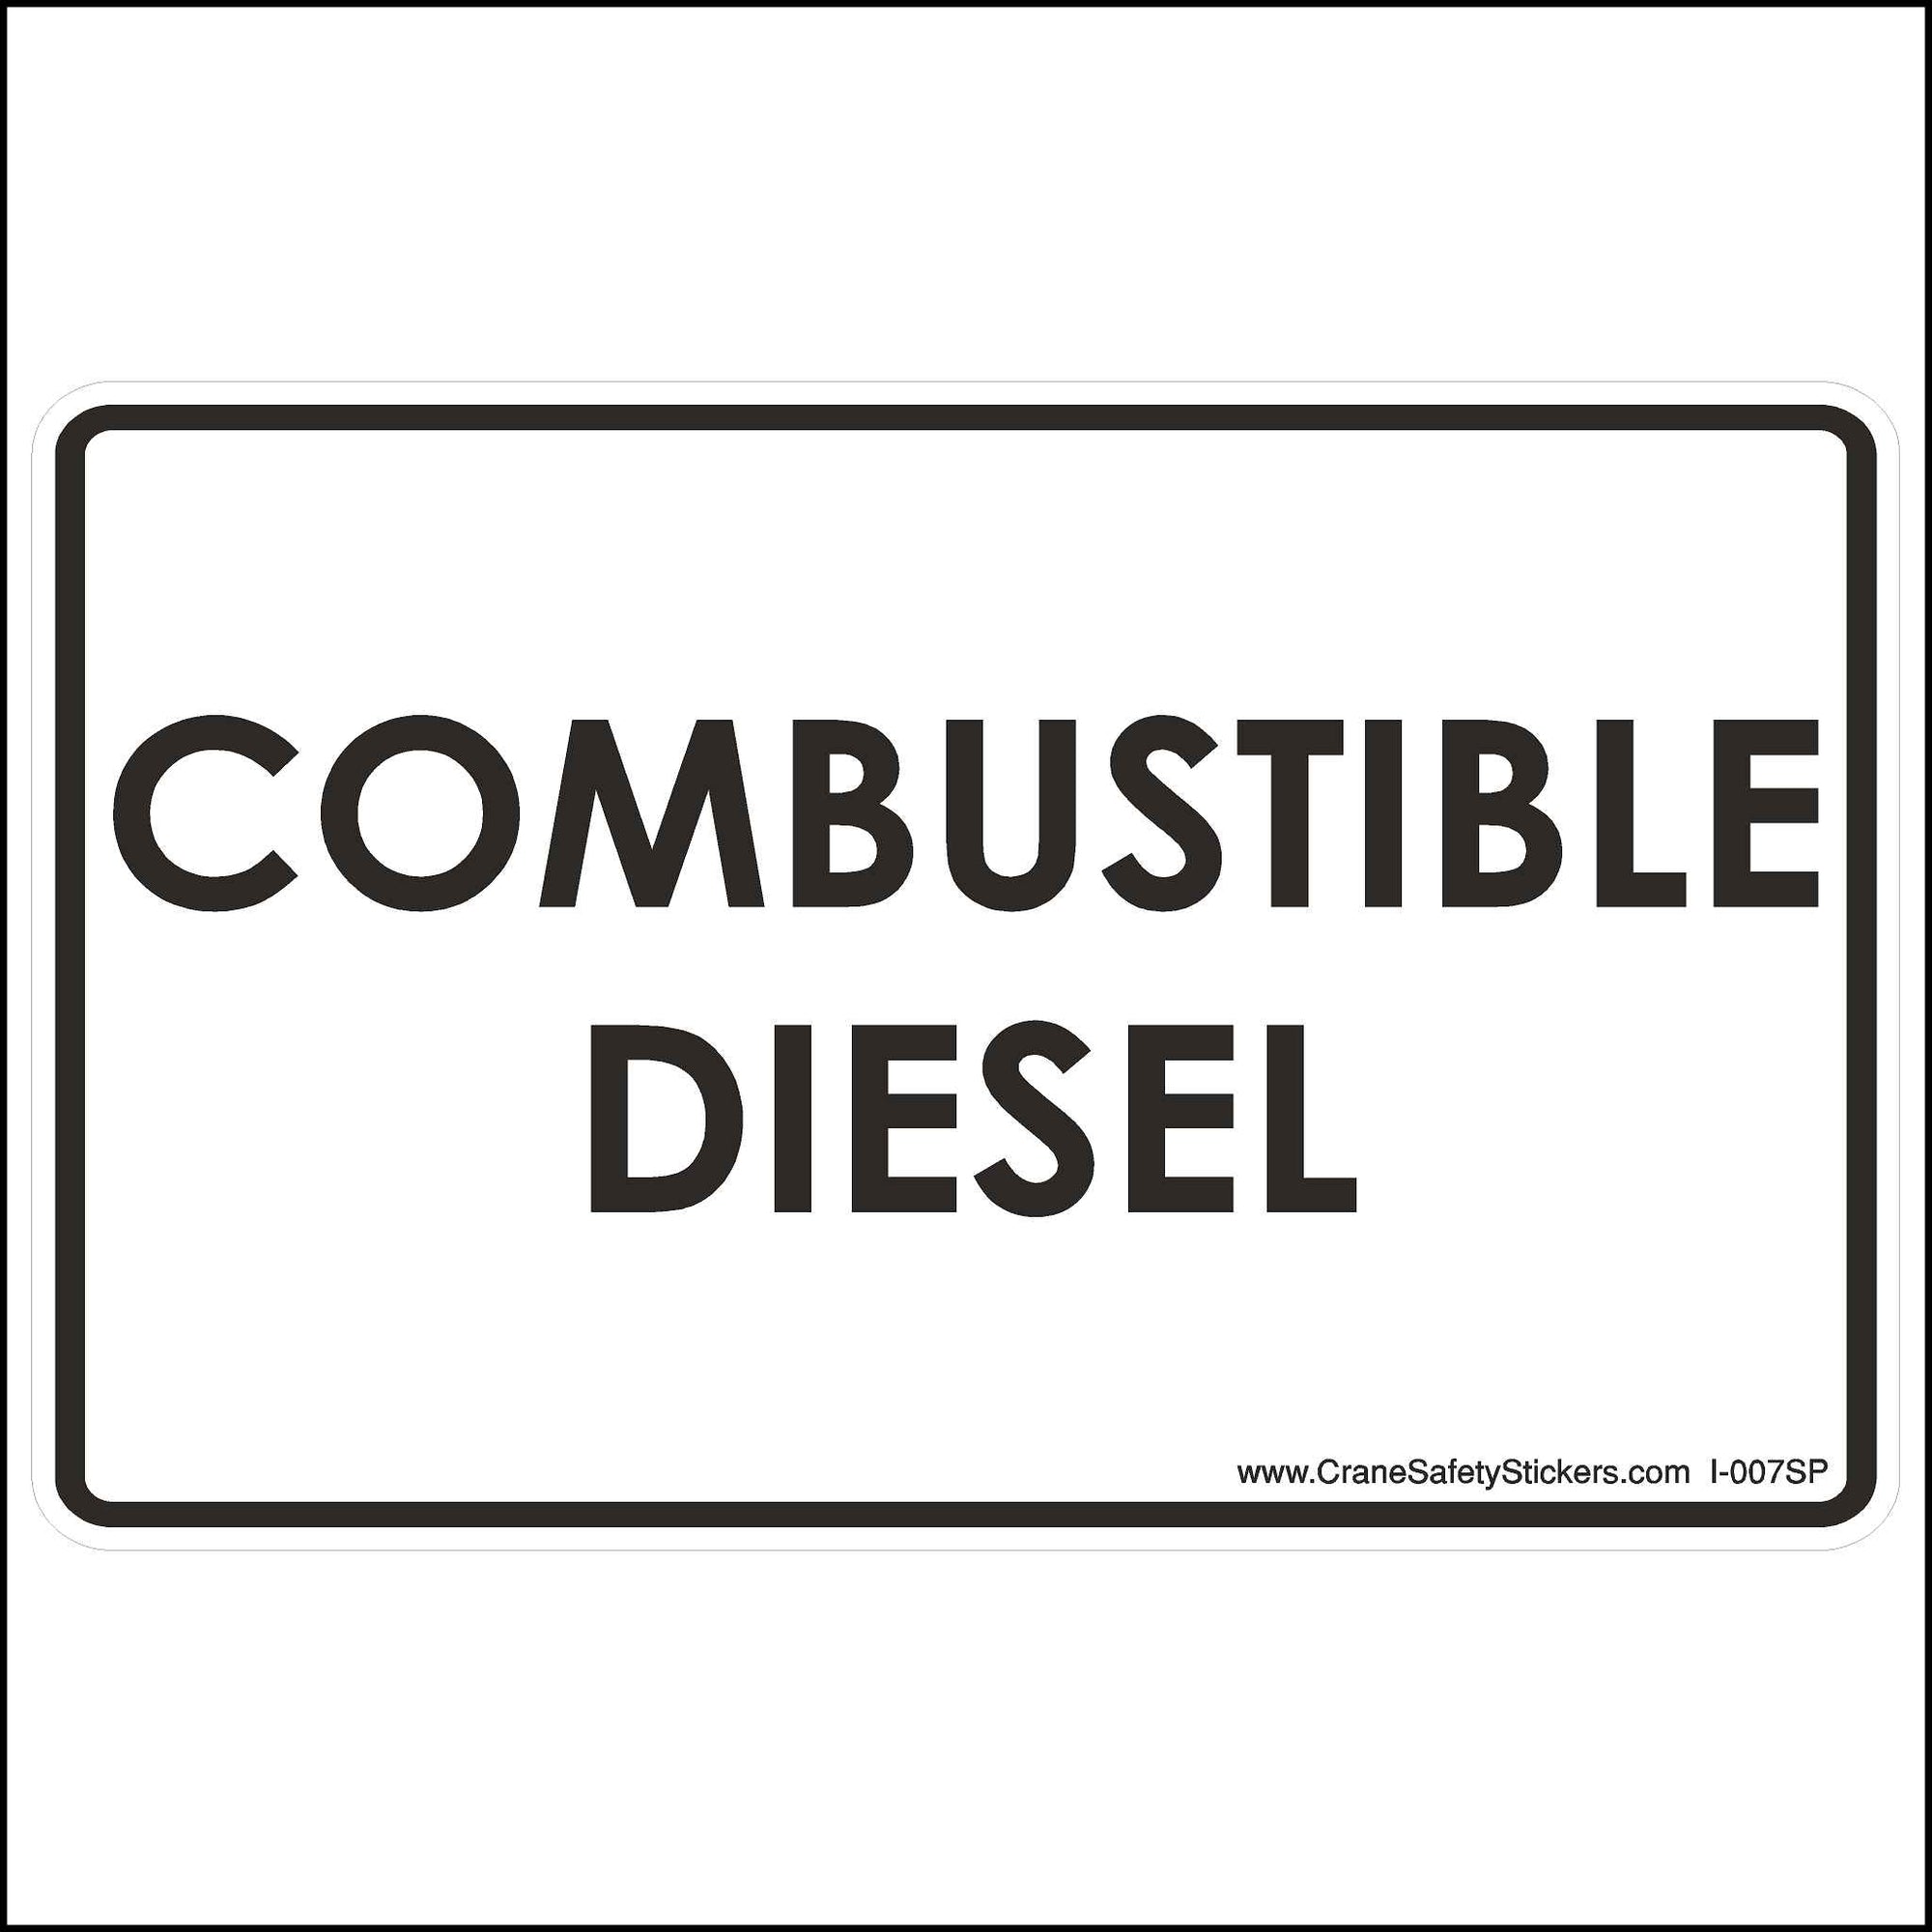 Spanish Diesel Fuel Sticker, printed with "COMBUSTIBLE DIESEL". letters are printed in black on a white background. 